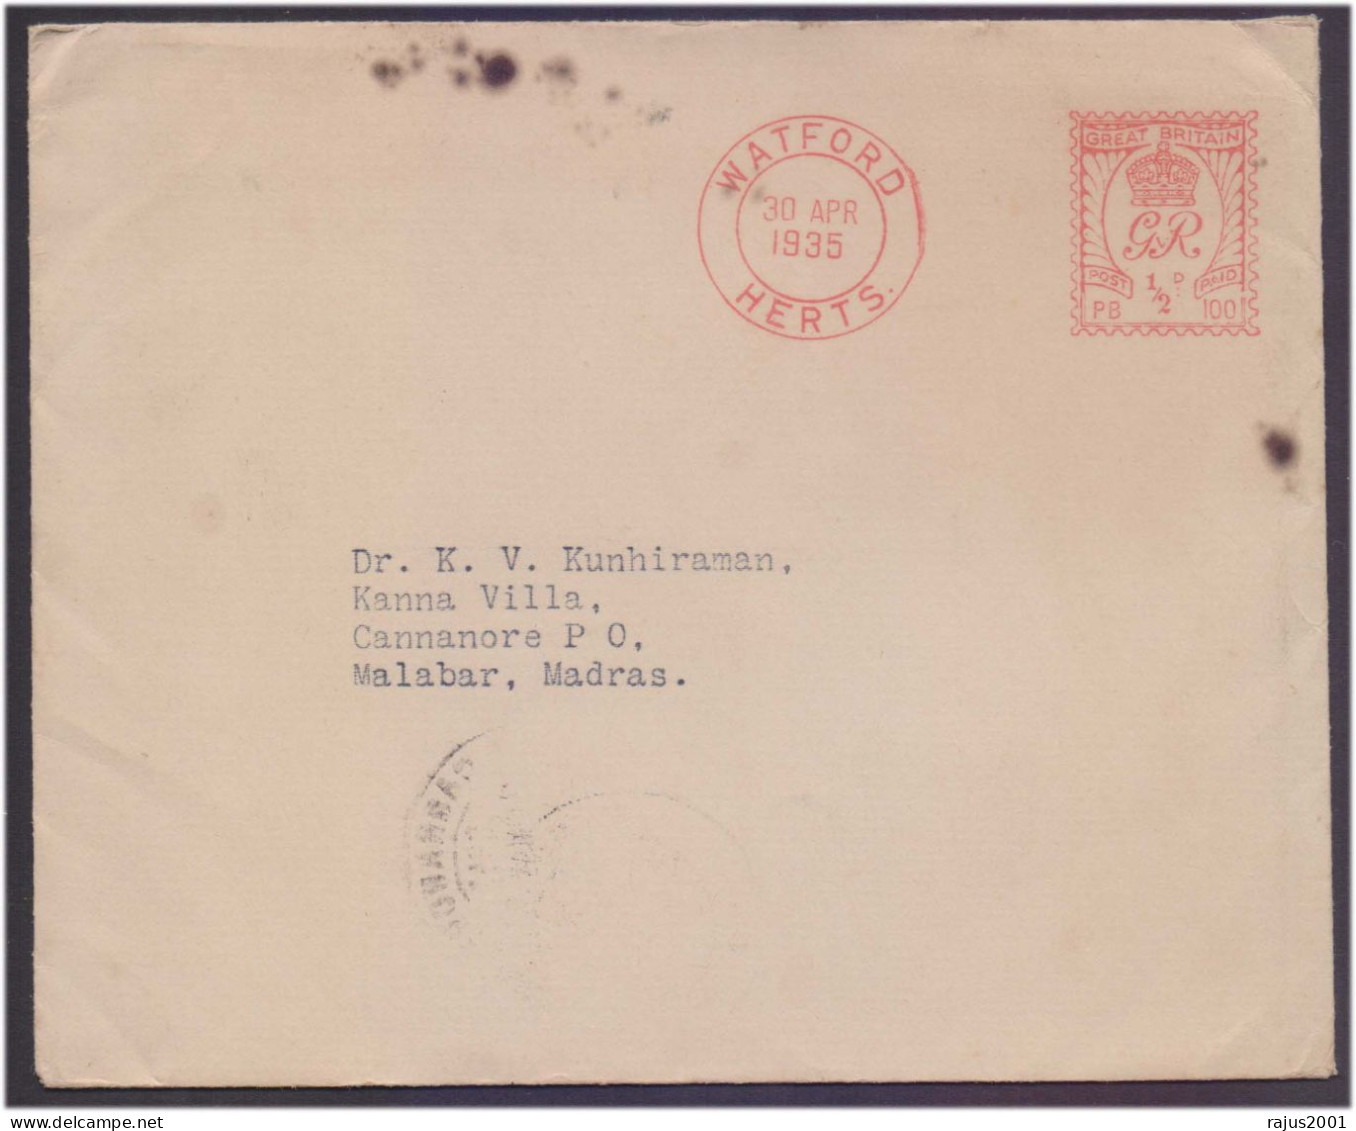 WATFORD HERTS EMA RED METER FRANK BRITAIN TO MALABAR MADRAS INDIA CIRCULATED COVER 1935 CLEAR DELIVERY MARK As Scan - Machines à Affranchir (EMA)